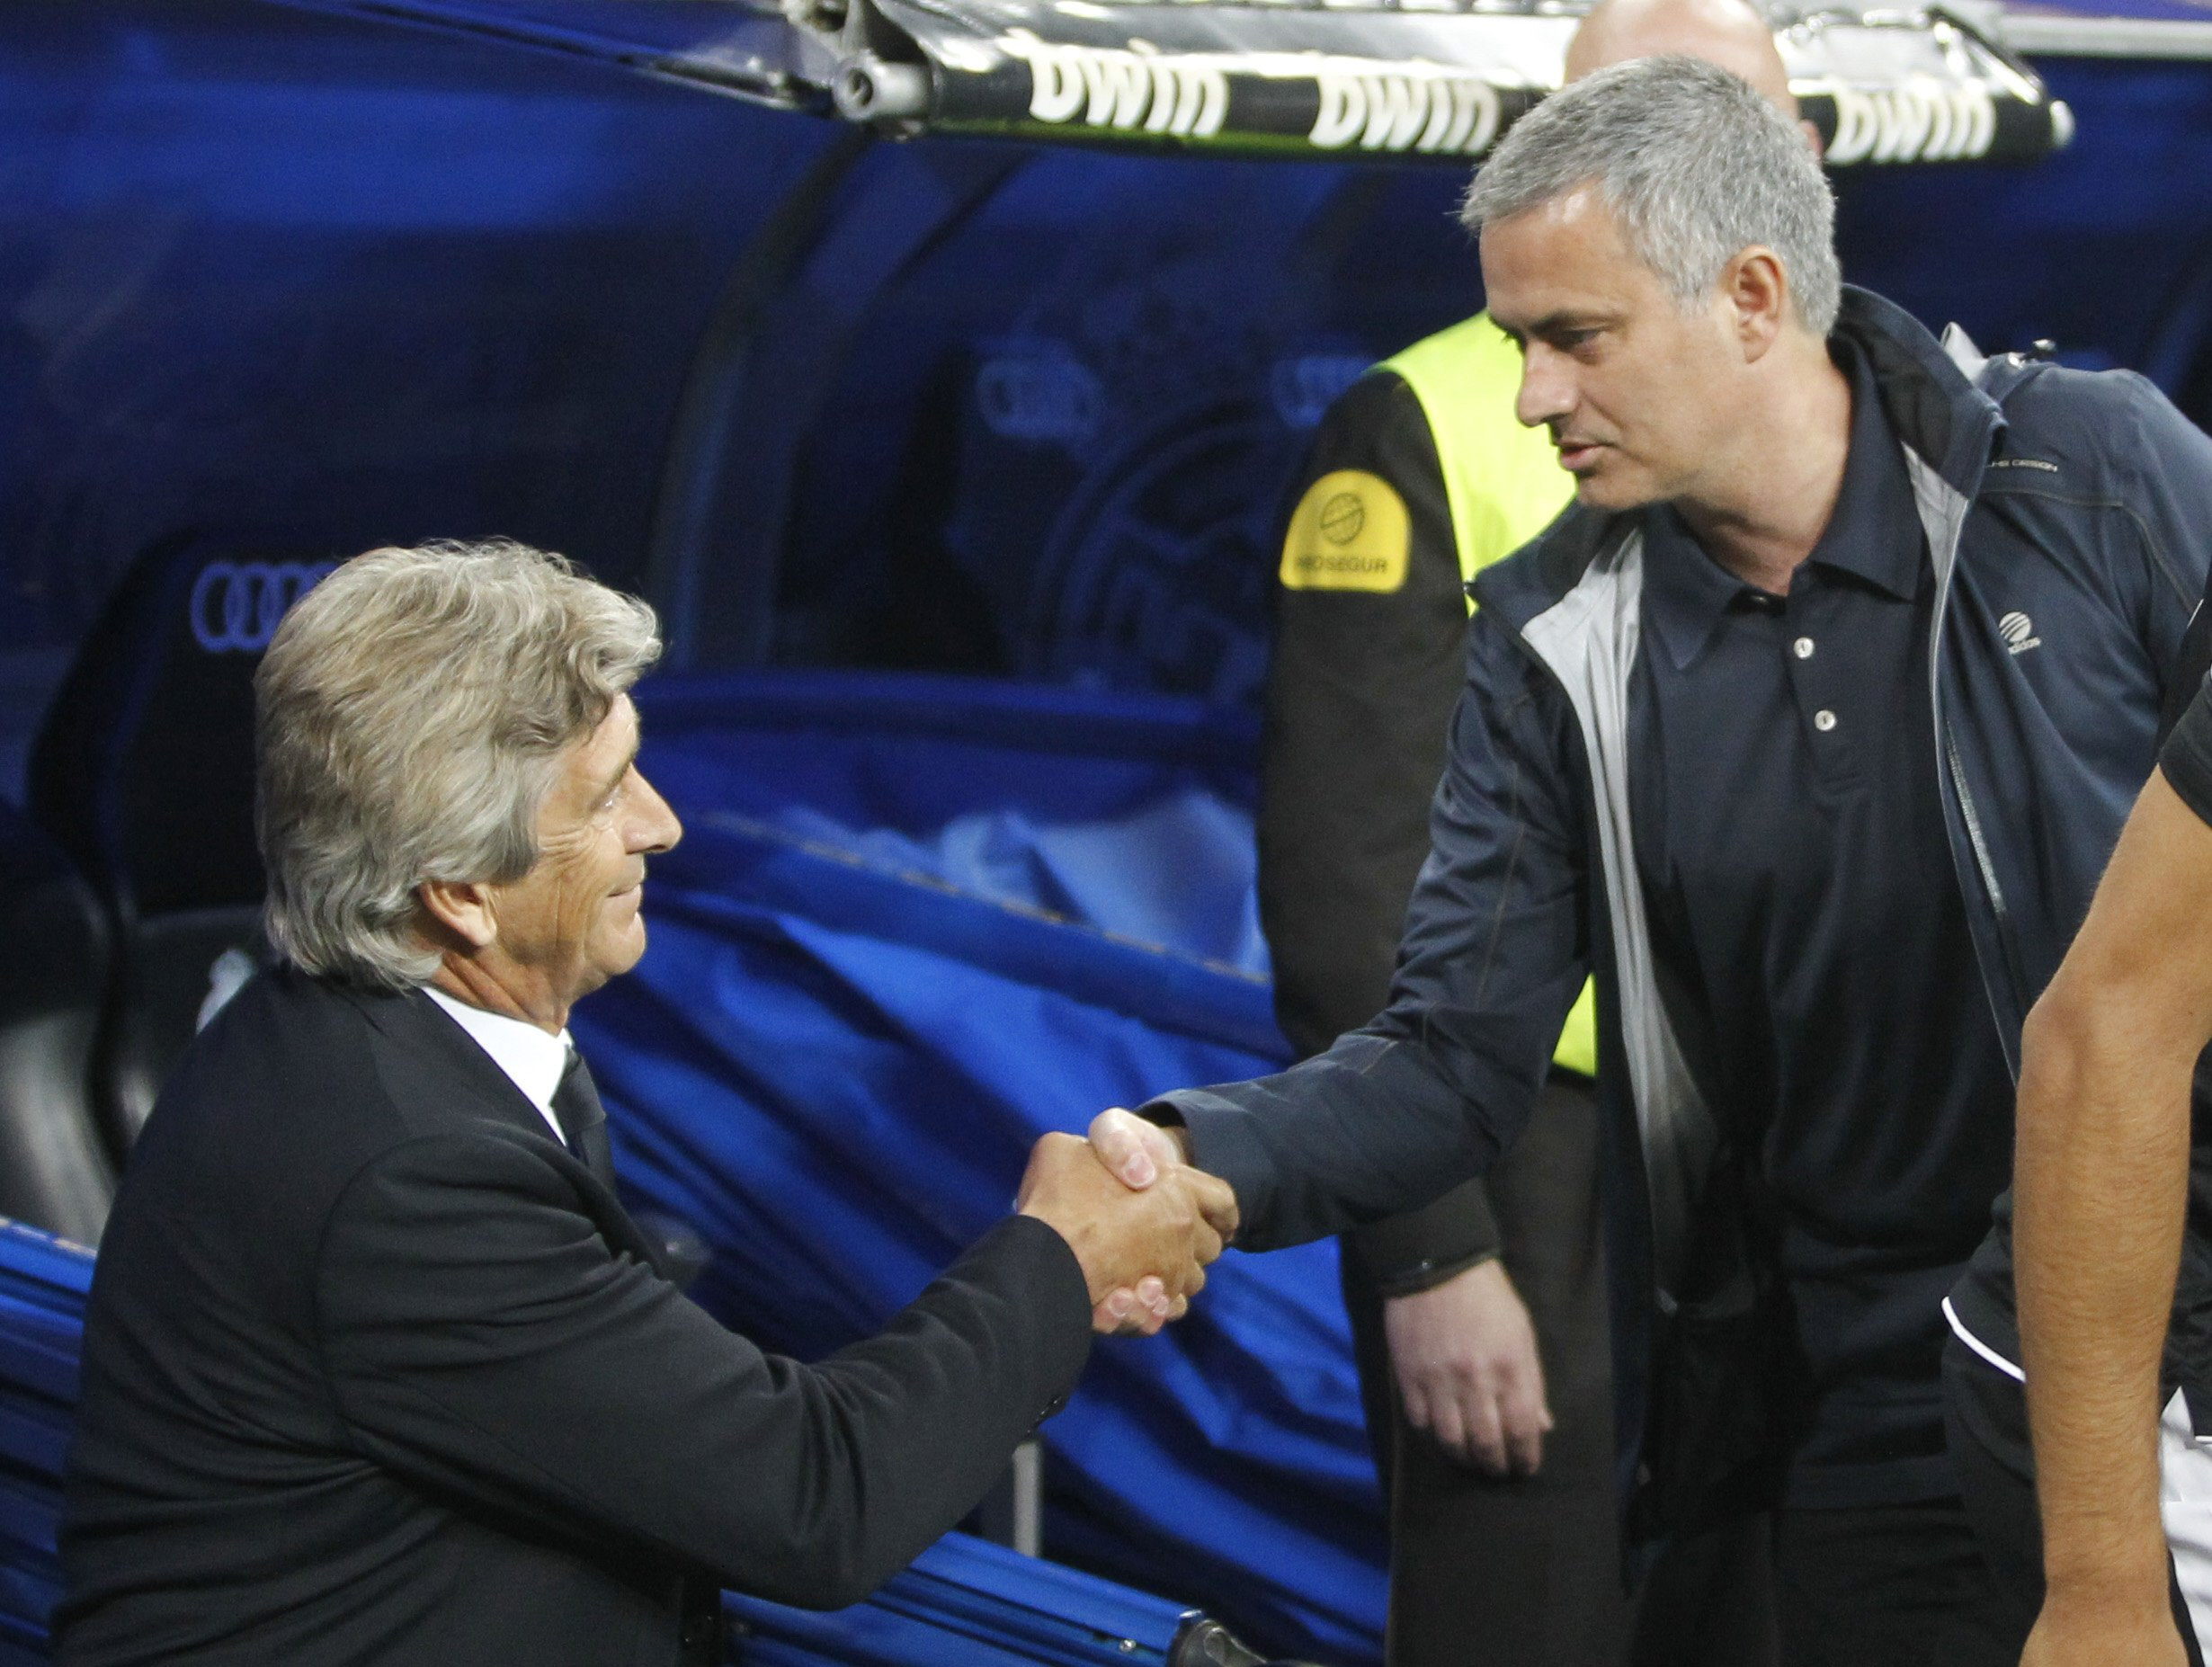 epa03692451 Real Madrid's head coach Jose Mourinho (R) shakes hands with Malaga's head coach Manuel Pellegrini (L) before their Spanish Primera Division soccer match played at Santiago Bernabeu stadium, in Madrid, central Spain, on 08 May 2013.  EPA/Alberto Martin